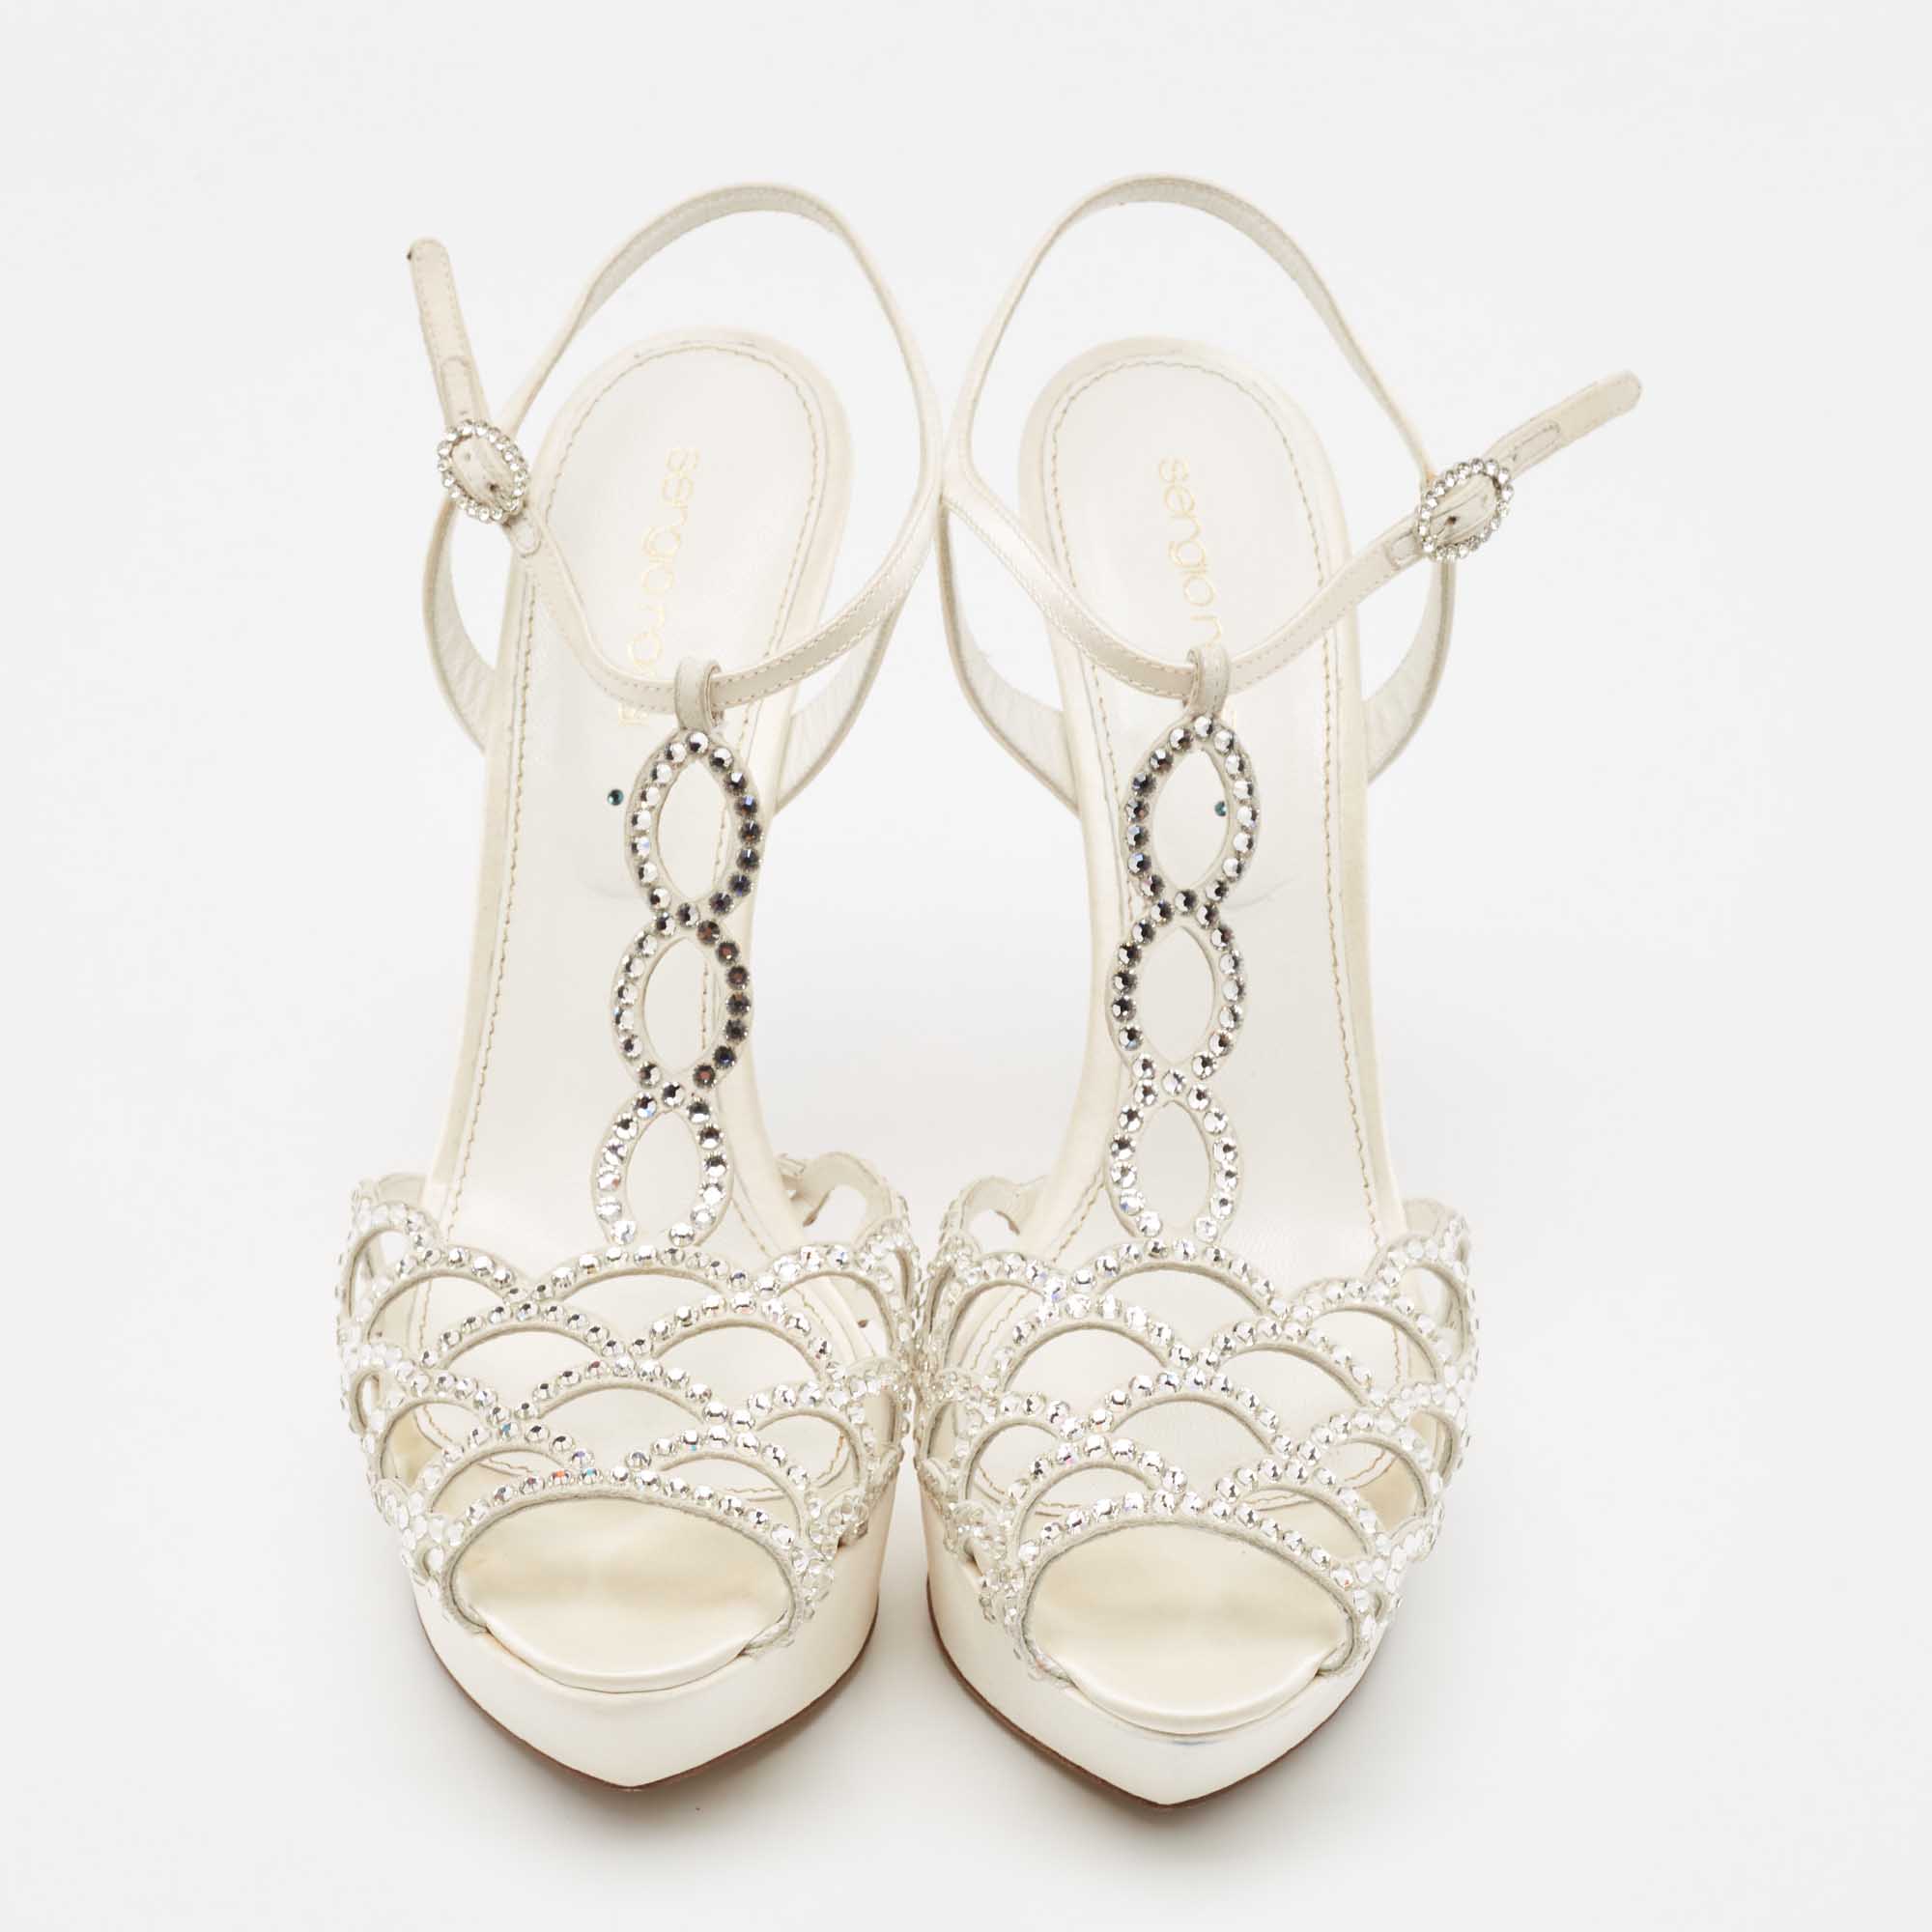 Sergio Rossi White Satin And Suede Crystal Embellished Strappy Scalloped Platform Sandals Size 40